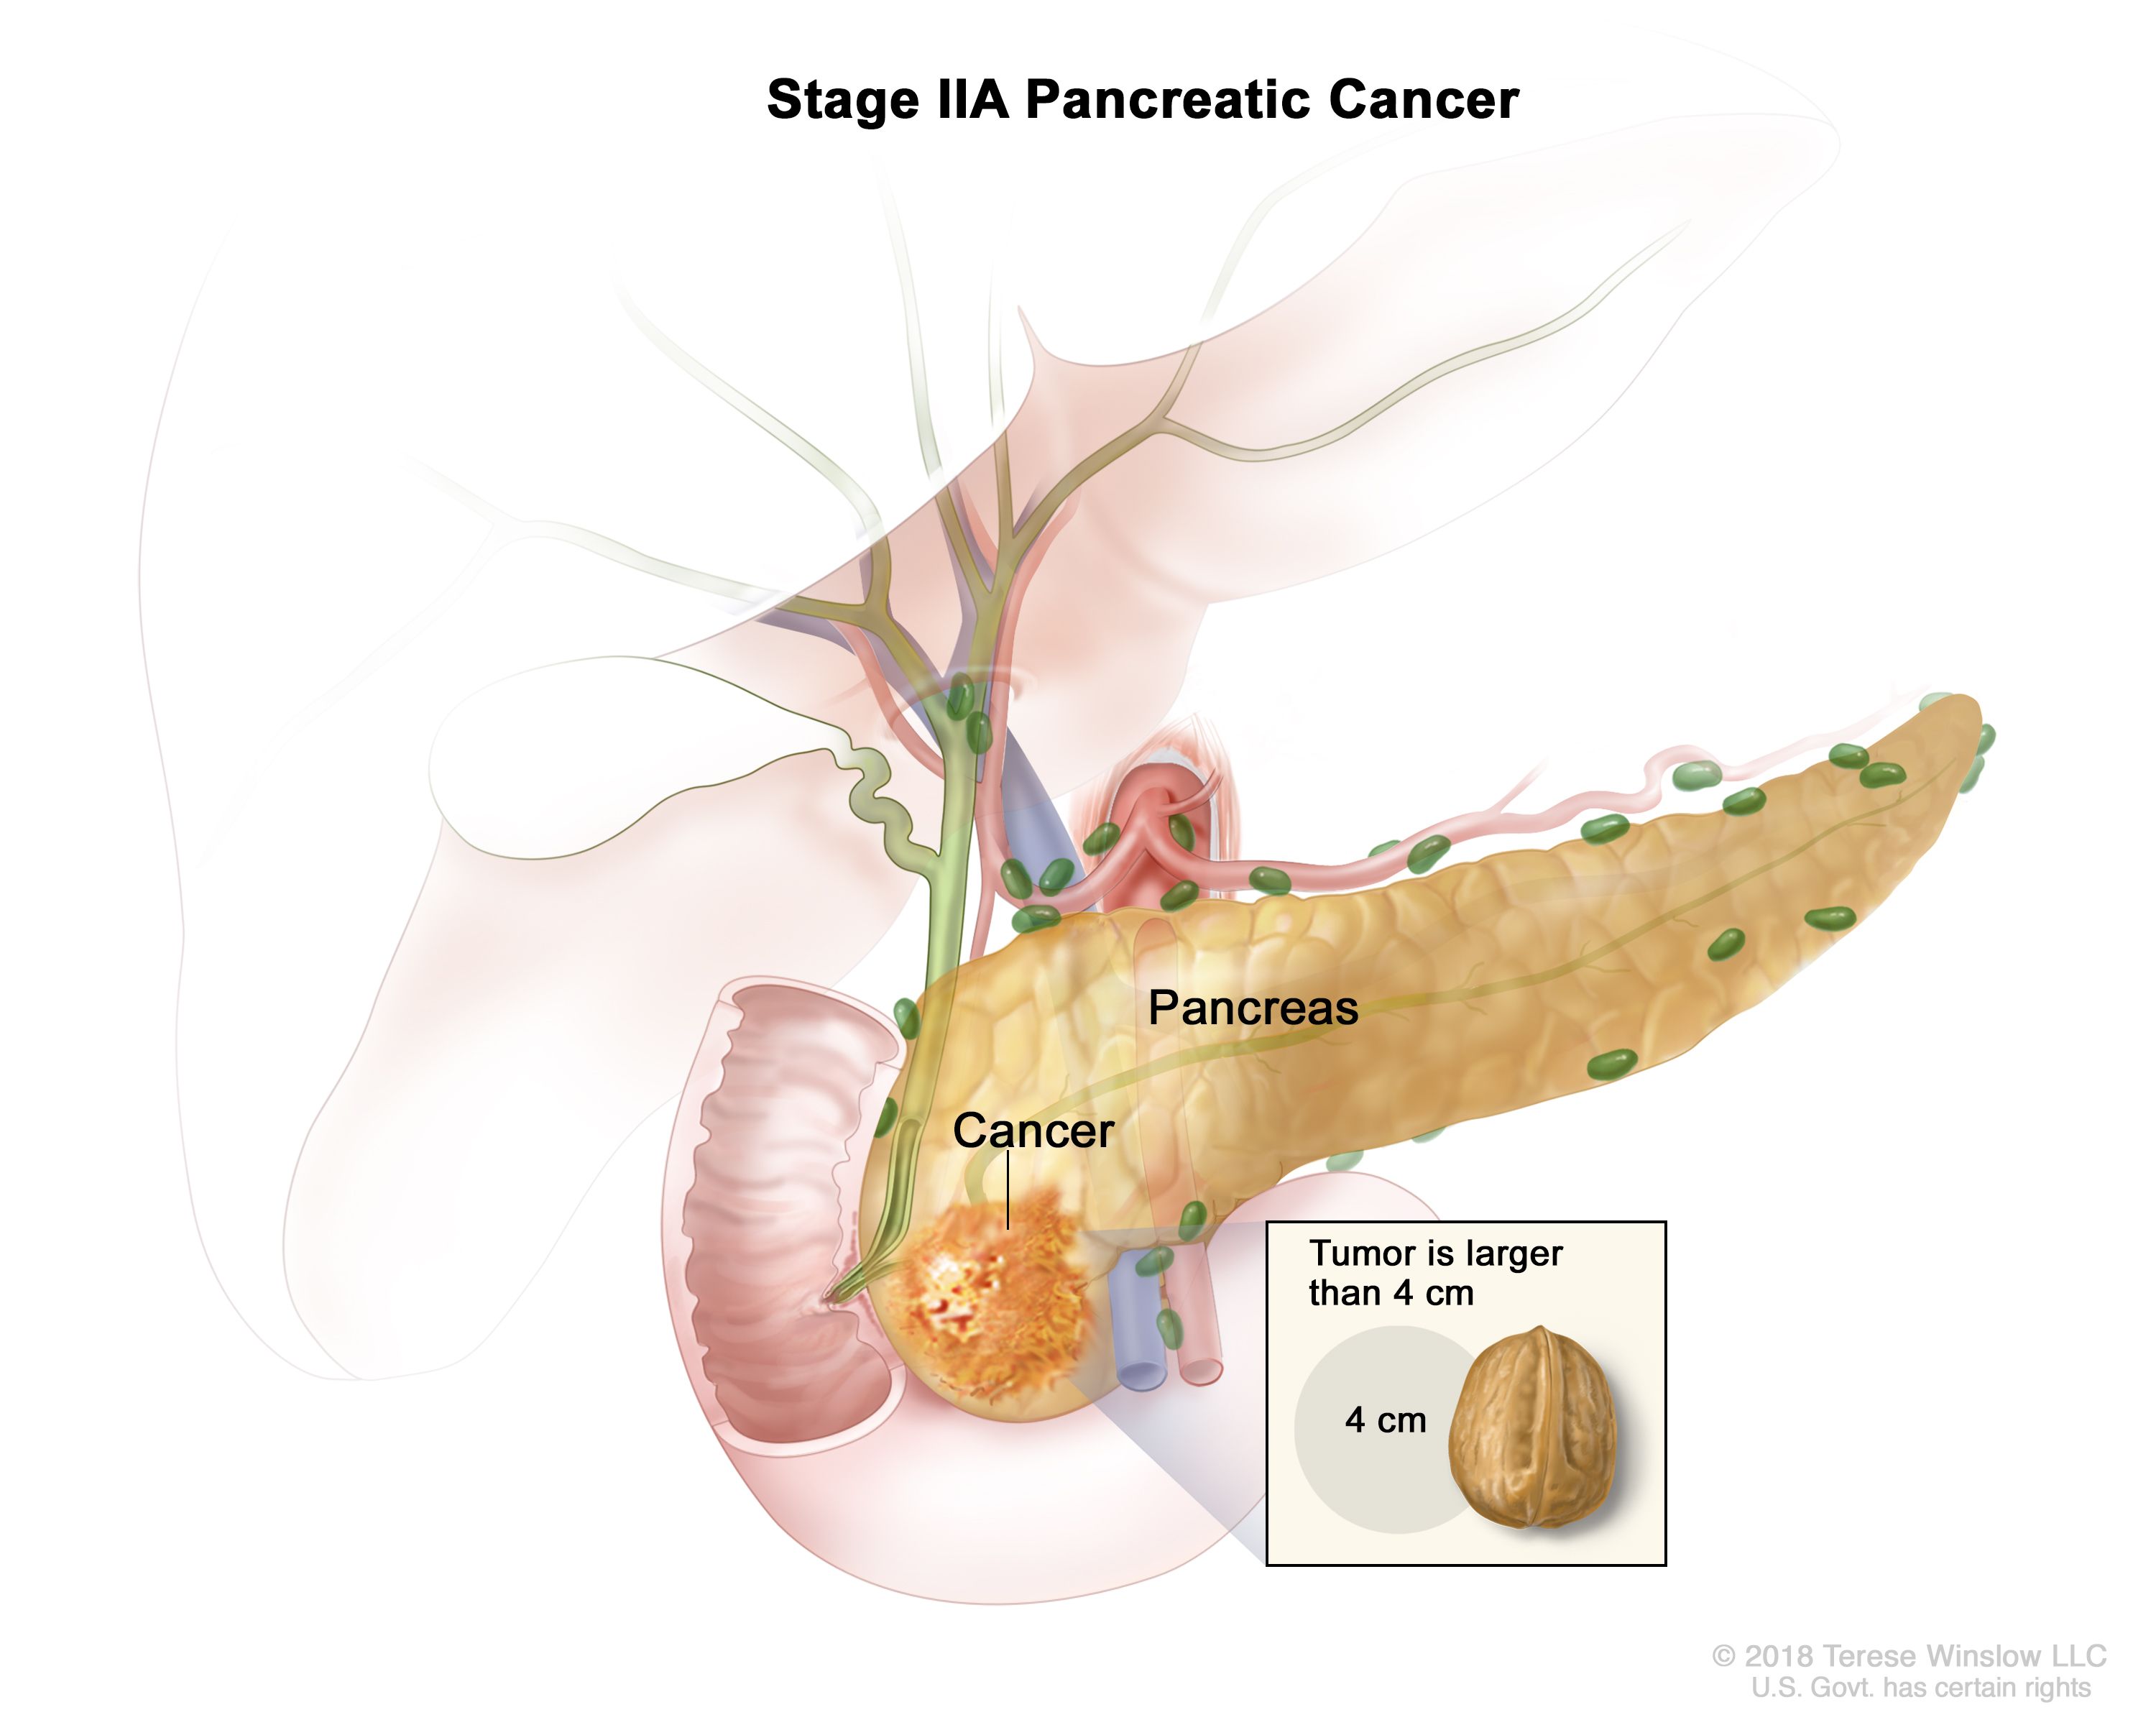 Journal of Gastrointestinal and Liver Diseases - Pancreatic cancer risks